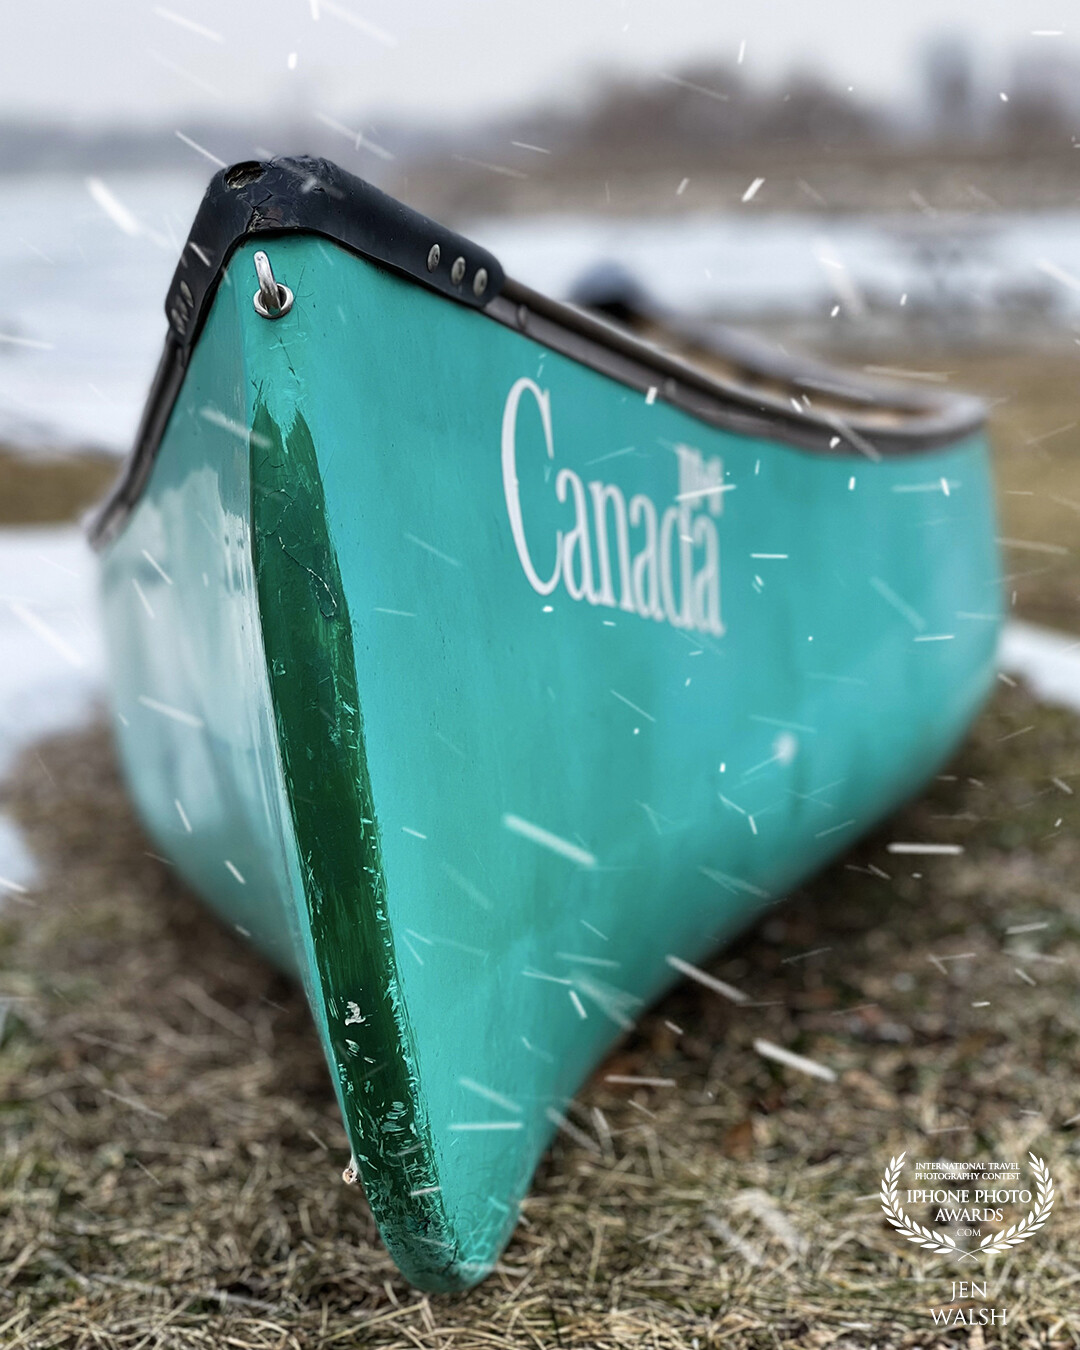 I found this canoe near the government building underneath a major local skyway.  The Canada Centre for Inland Waters is one of the world’s leading water-research complexes. There are several little islands in this area which house hundreds of birds.